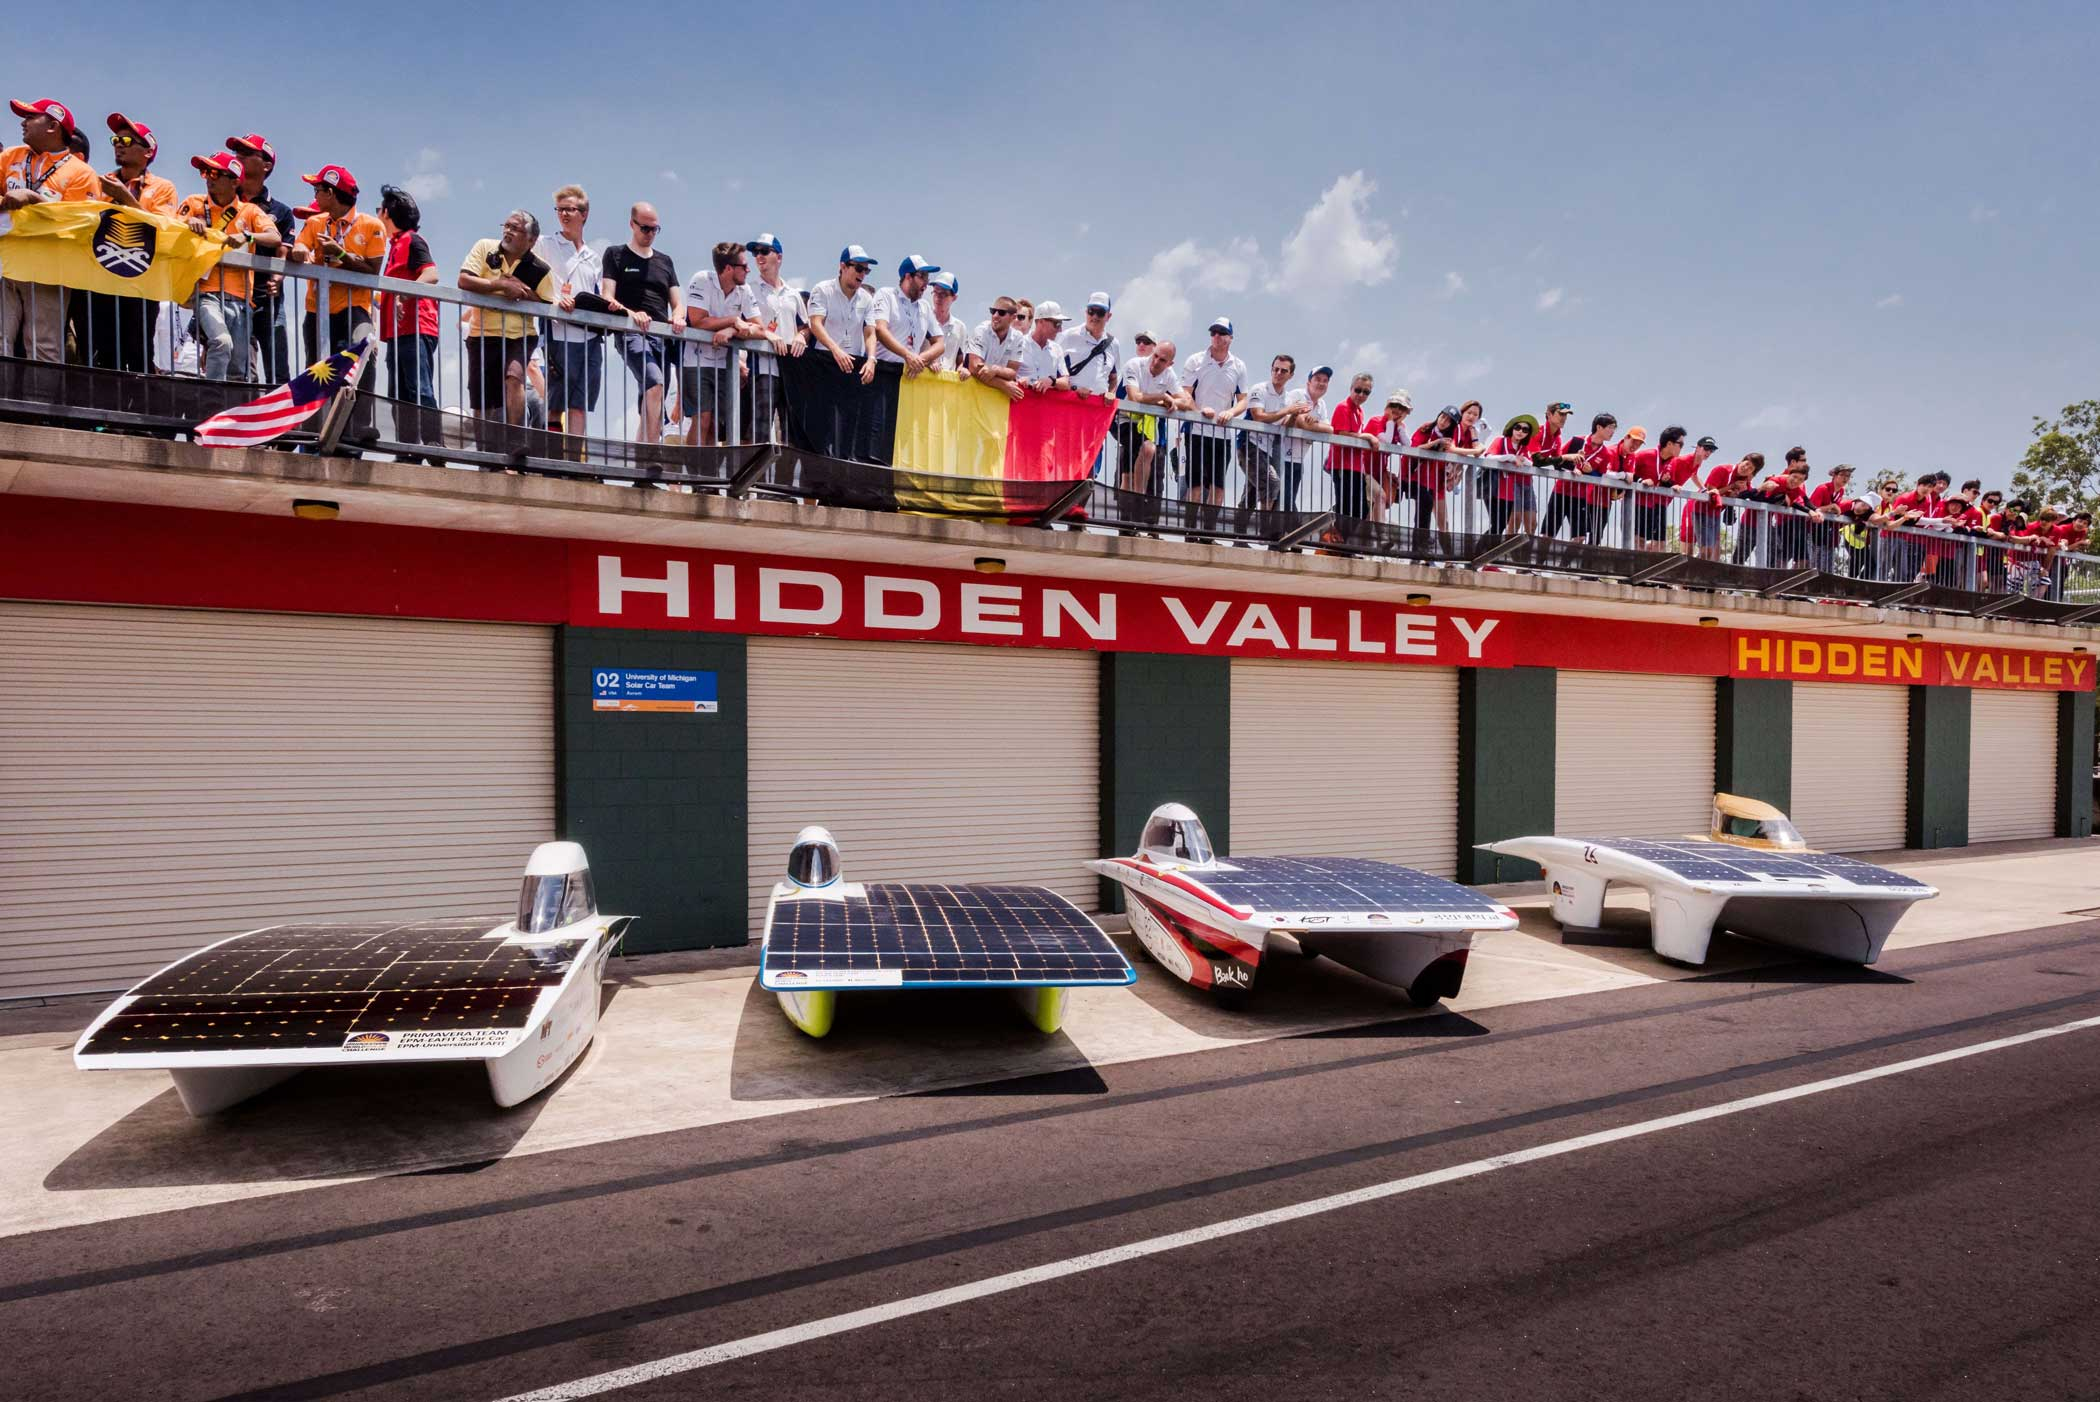 Punch Powertrain Solar Team shows team members posing above their cars after the qualification lap for the 2015 Bridgestone World Solar Challenge at Hidden Valley race track in Darwin on Oct. 18, 2015.